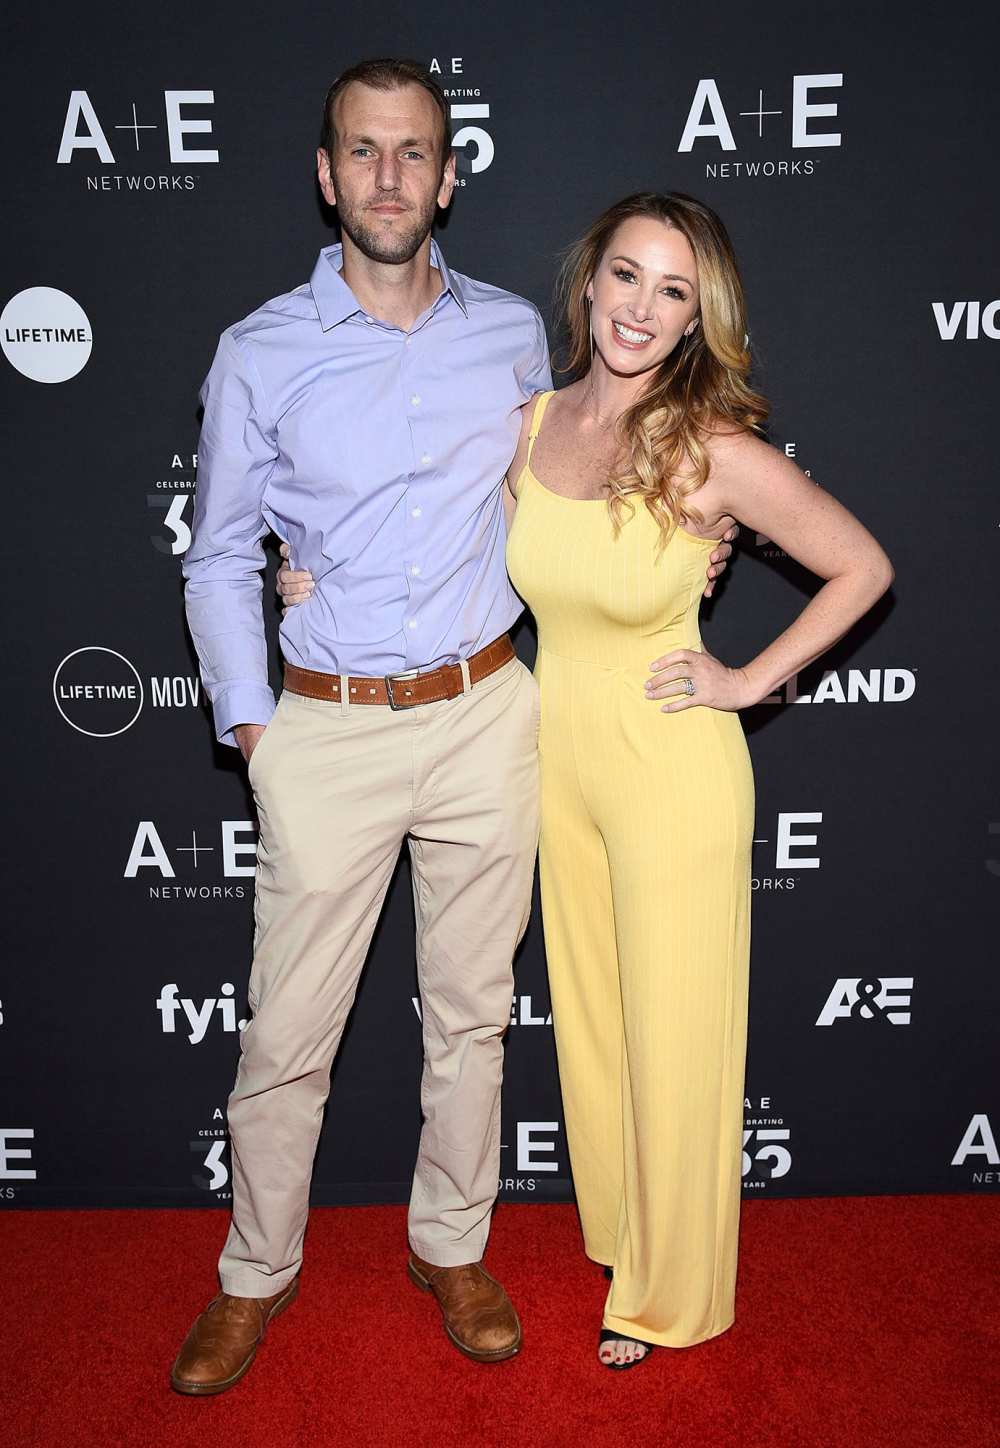 Married at First Sight Jamie Otis and Doug Hehner Are Going Through Rough Patch